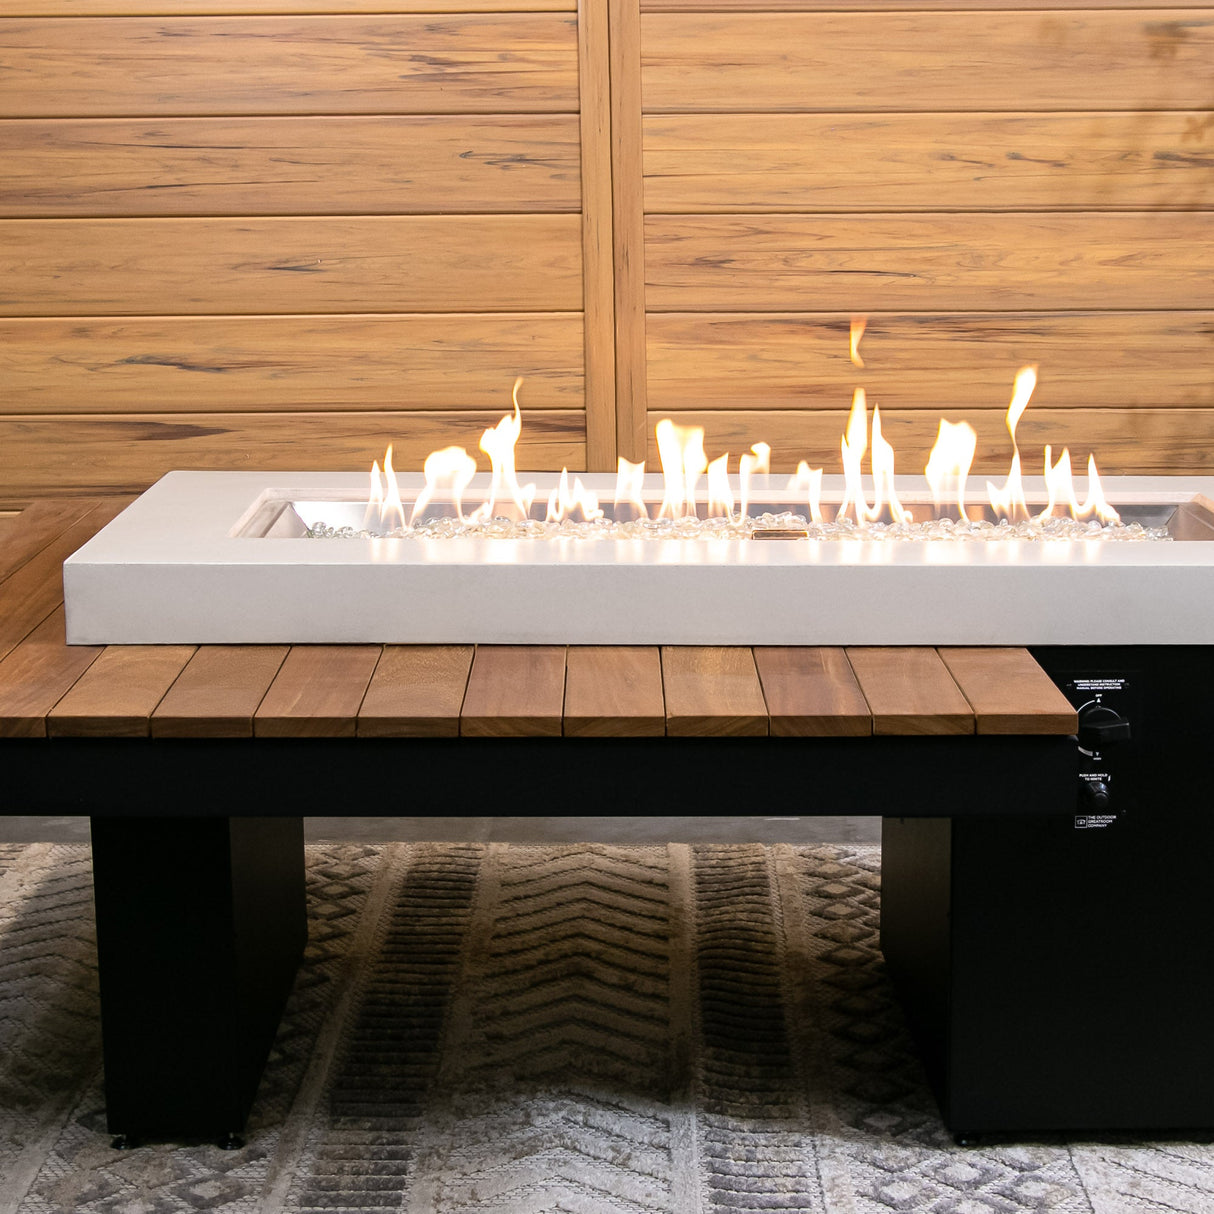 The Uptown Iroko Linear Gas Fire Pit Table placed near a wooden background